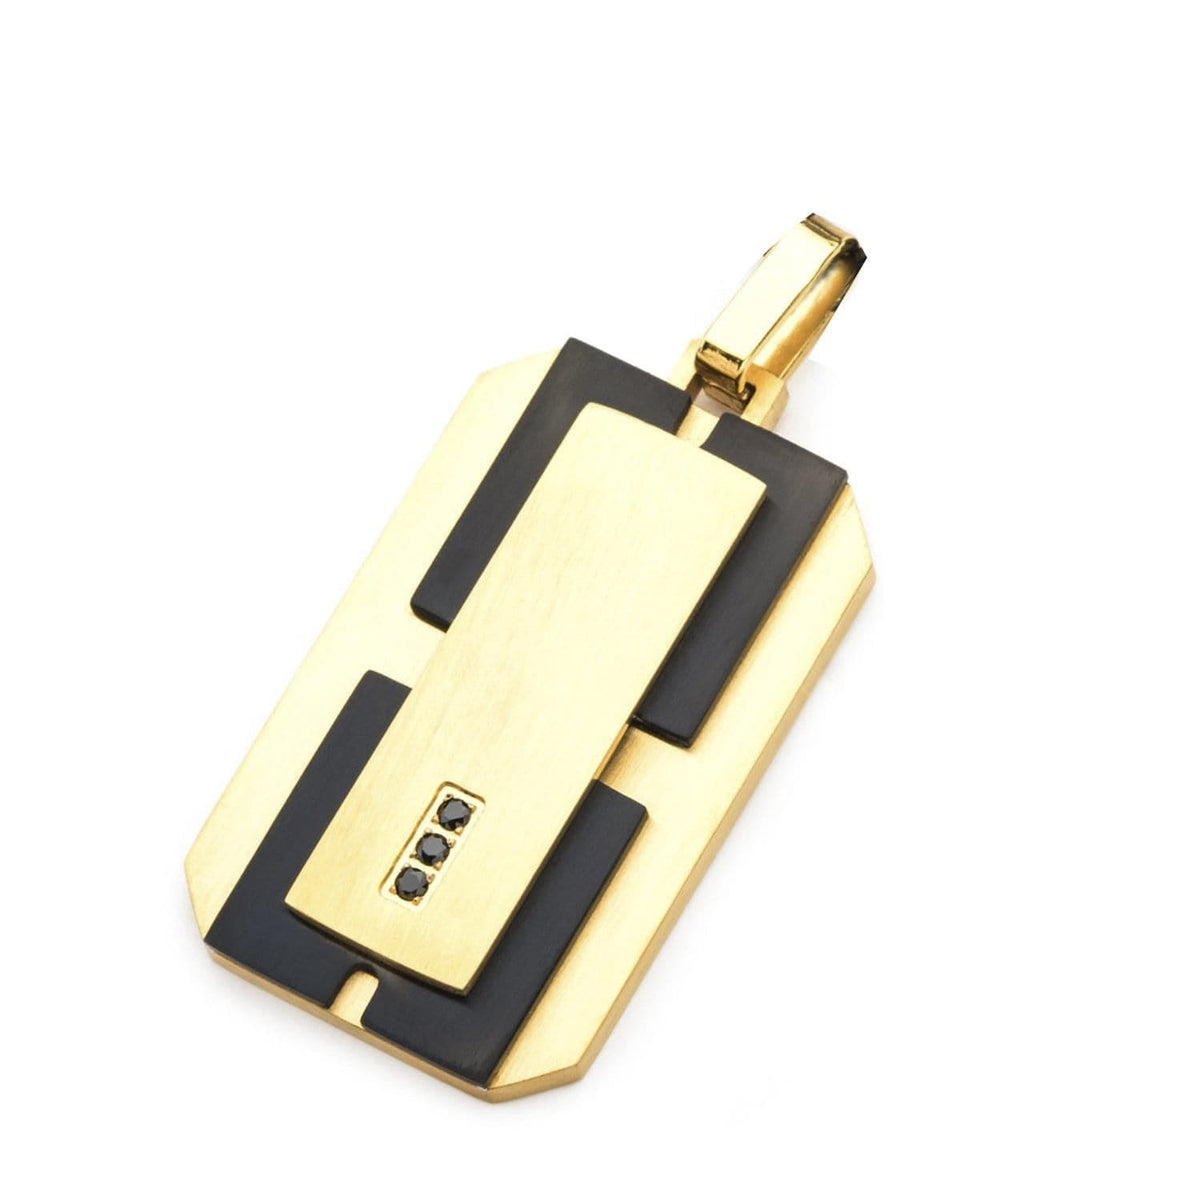 INOX JEWELRY Pendants Black and Golden Tone Stainless Steel with Black CZ Accent Modern Tag Pendant SSPRA0321NK